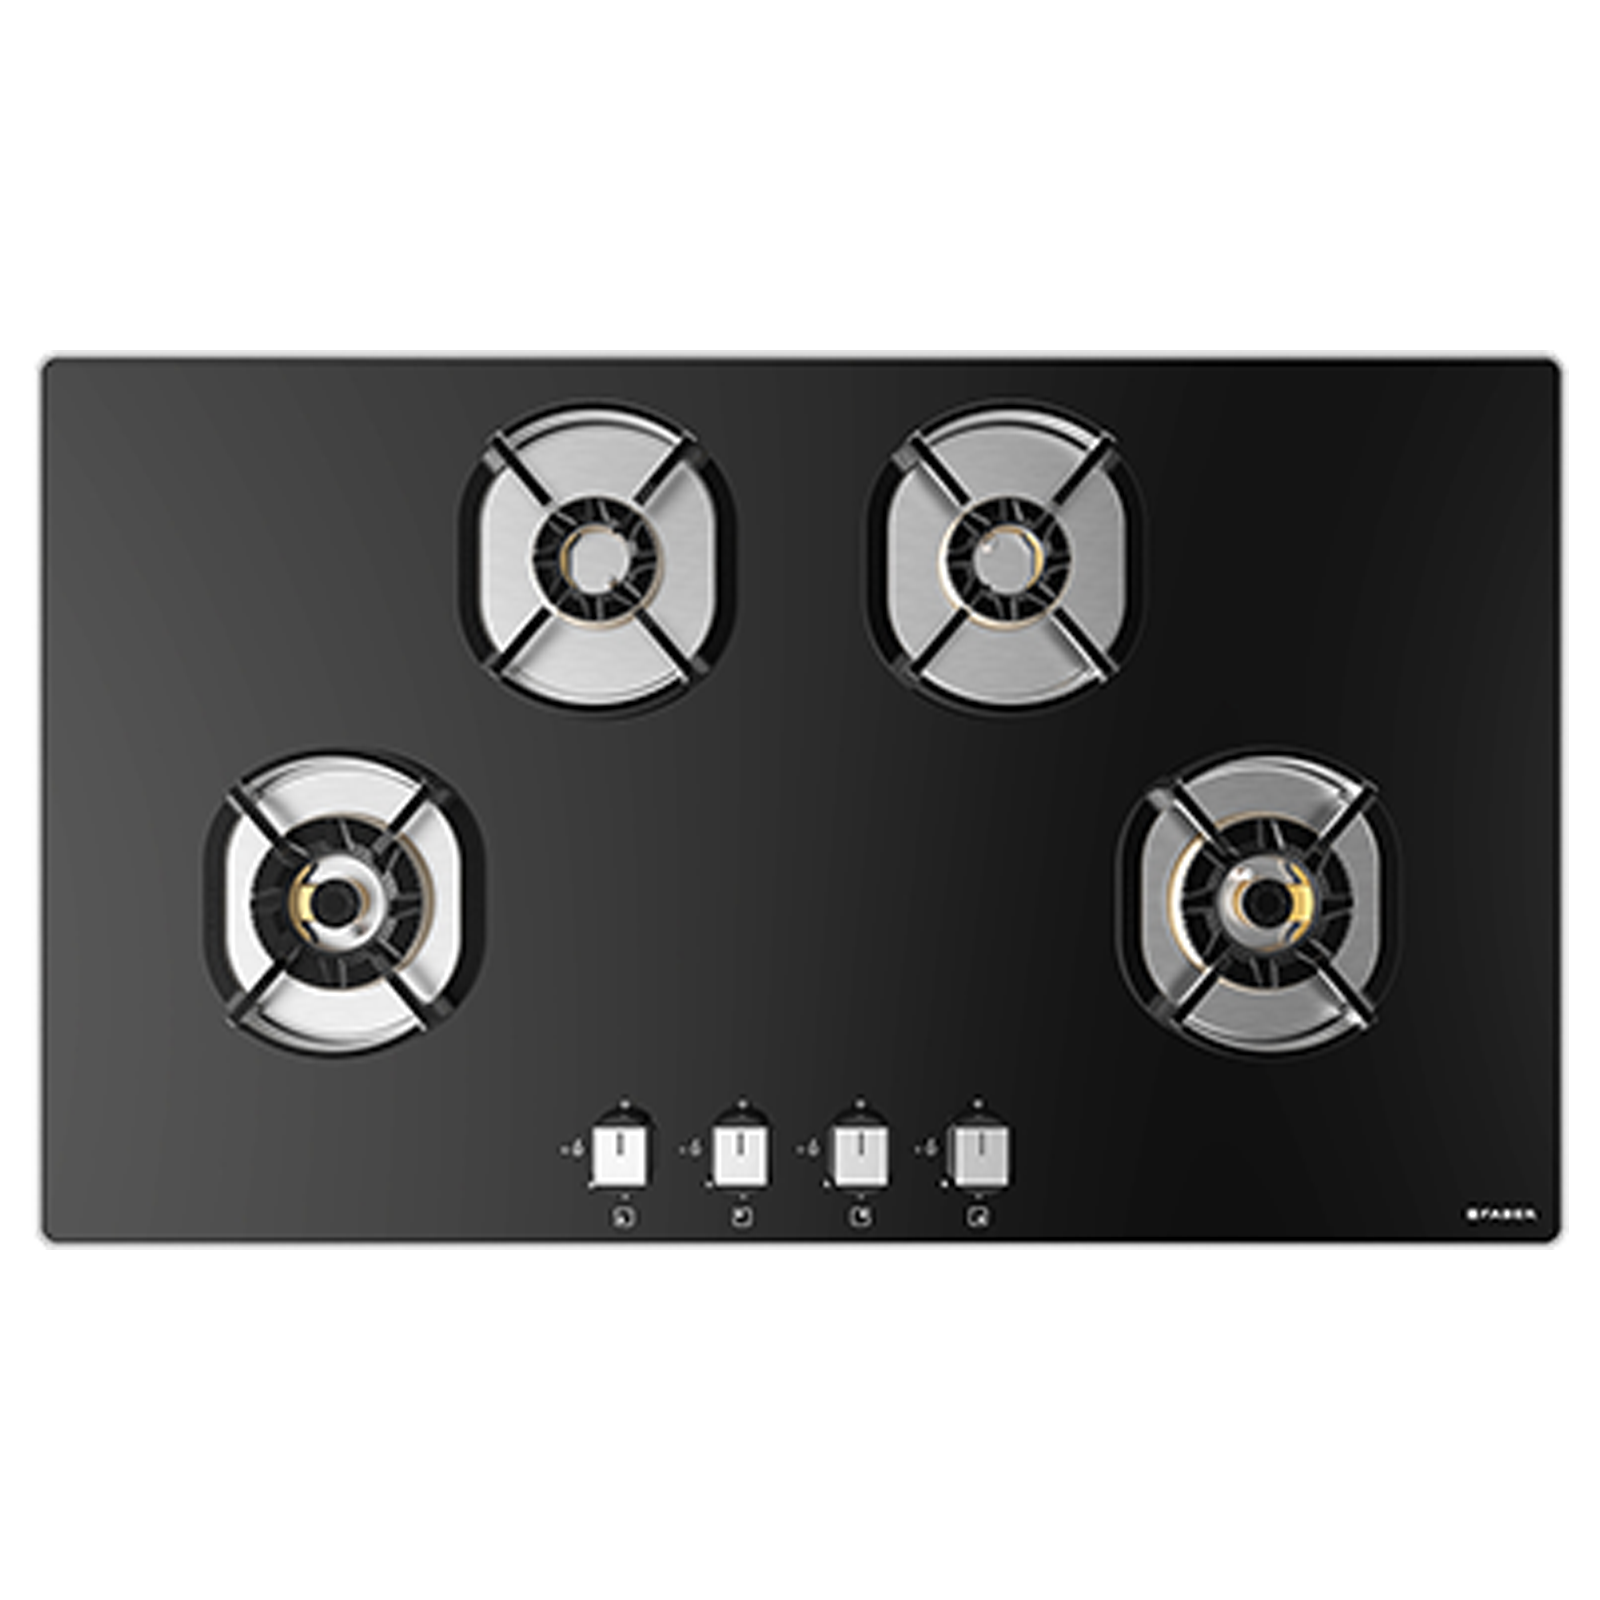 Faber Nexus HT904 CRS BR CI 4 Burner Stainless Steel Built-in Gas Hob (Auto Ignition, 1060657762, Black)_1